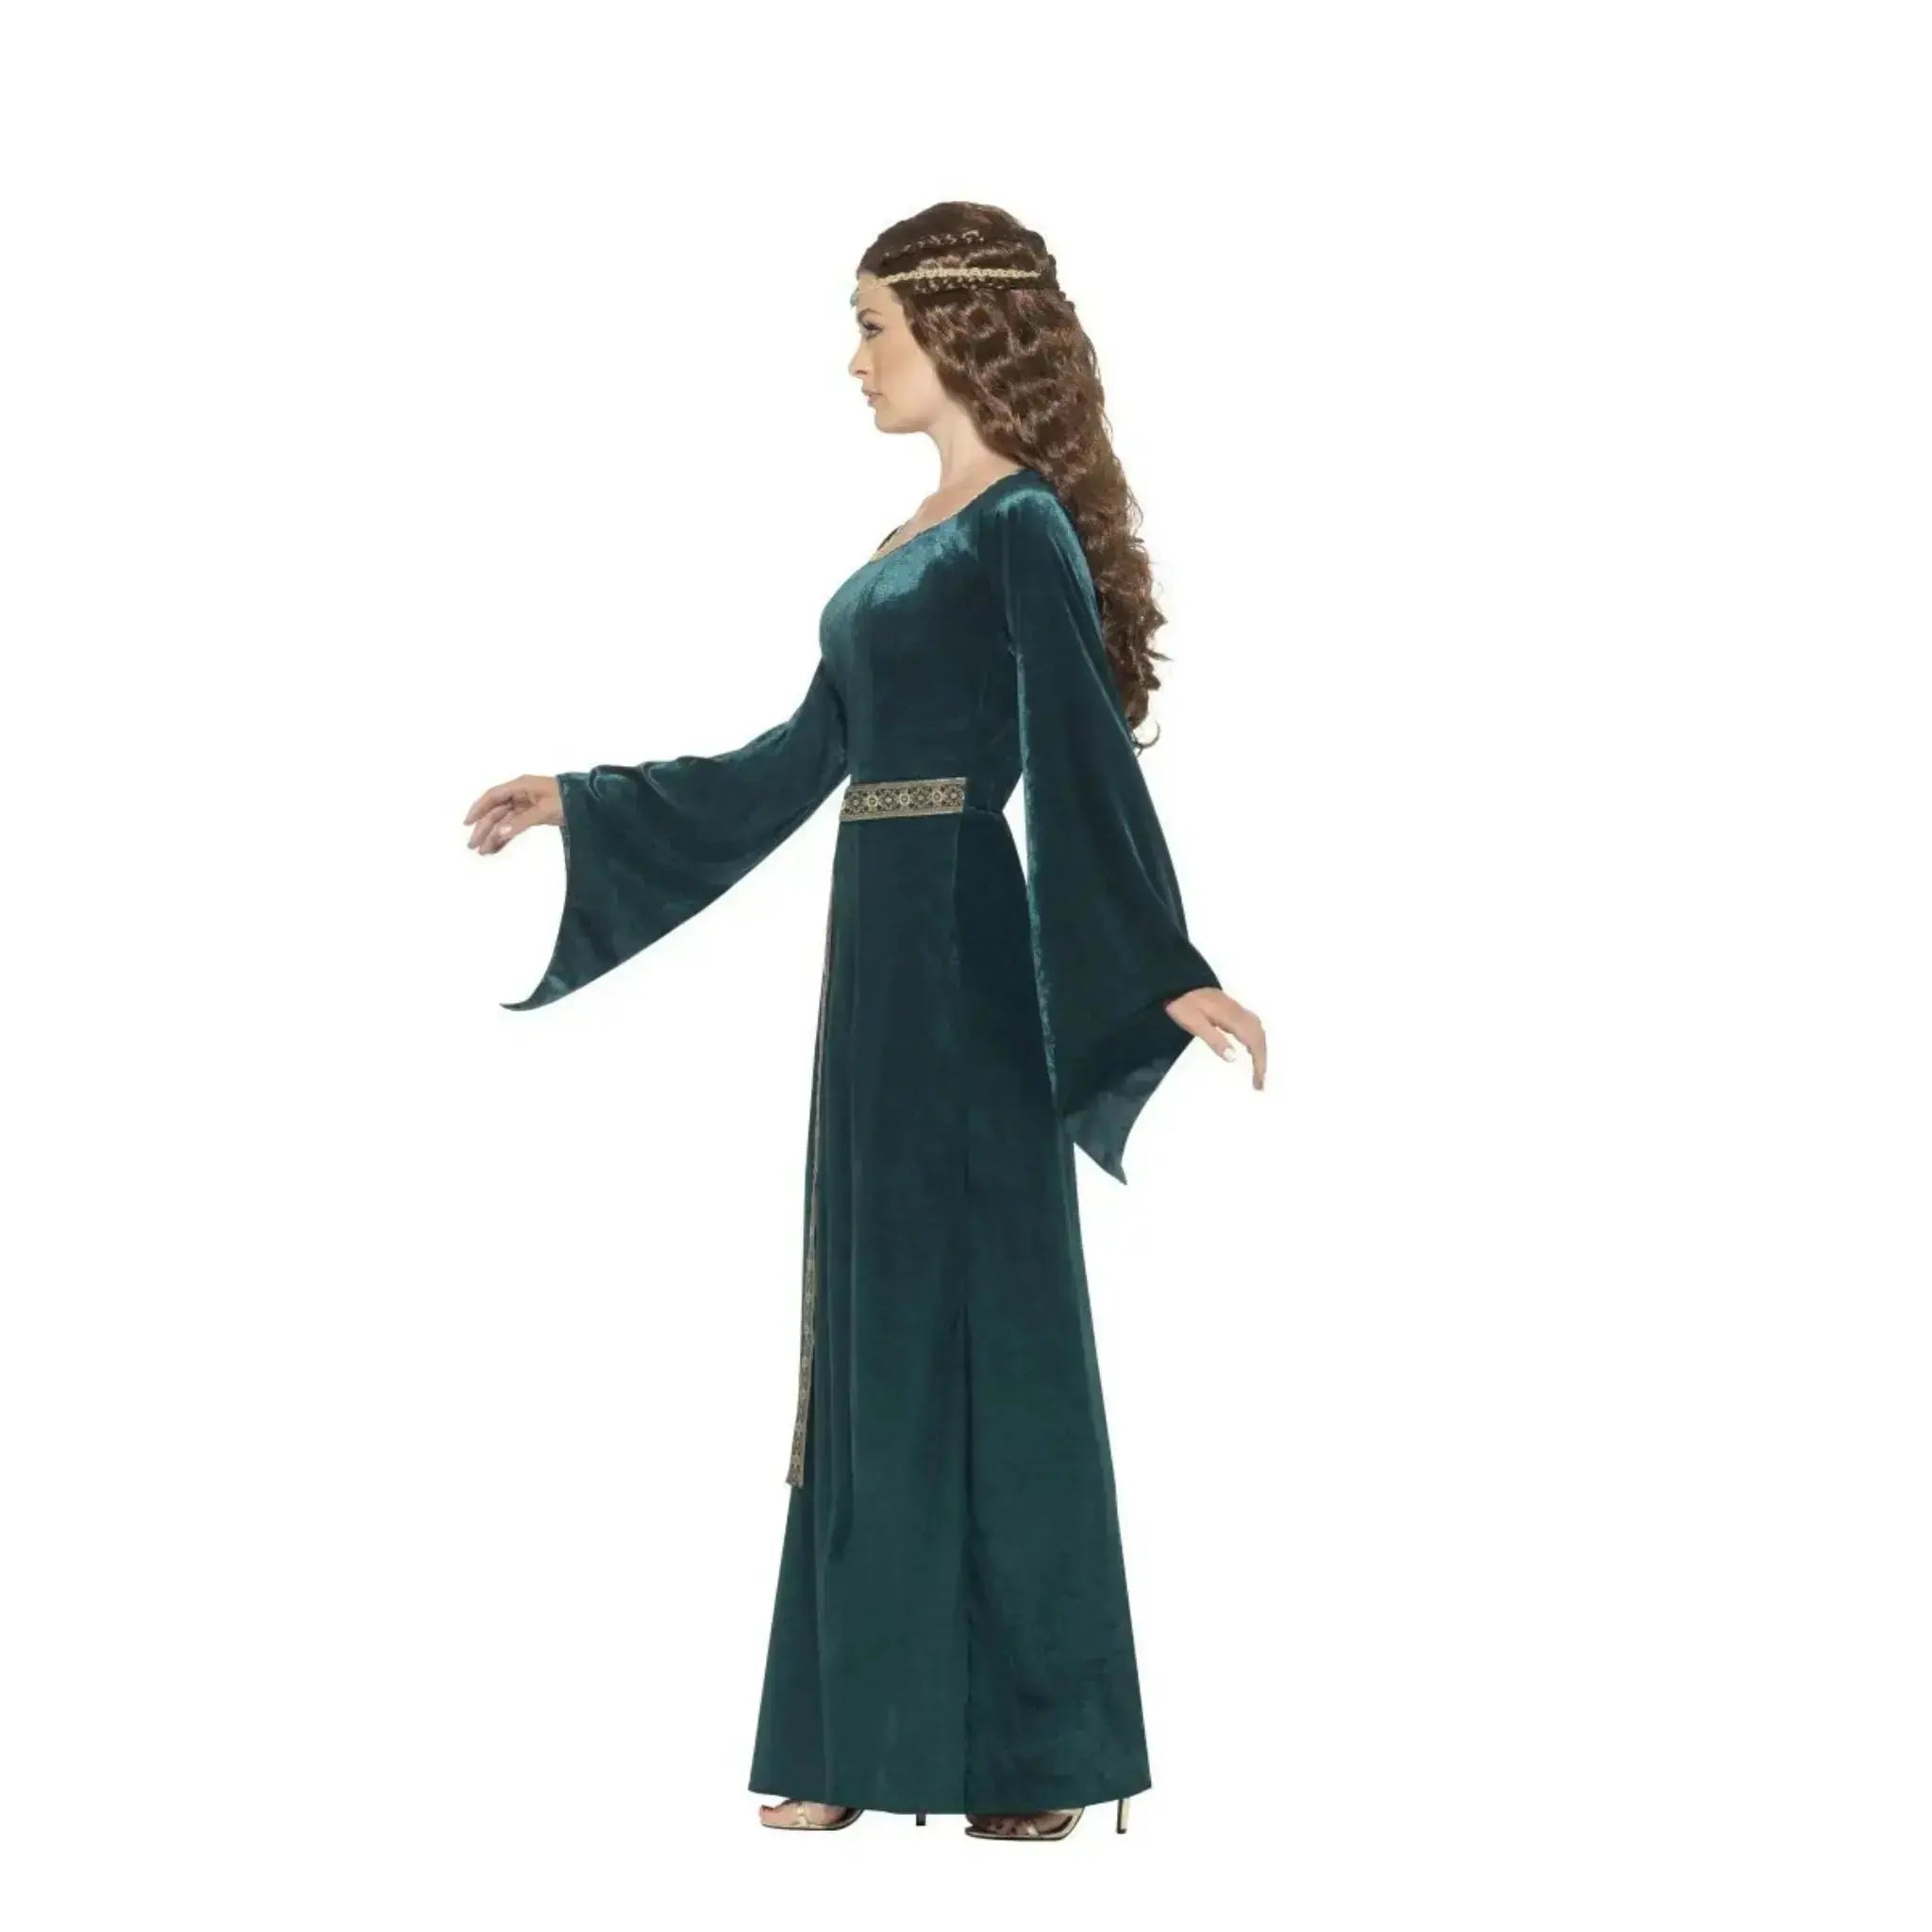 Medieval Maid Costume, Green with Headband | The Party Hut